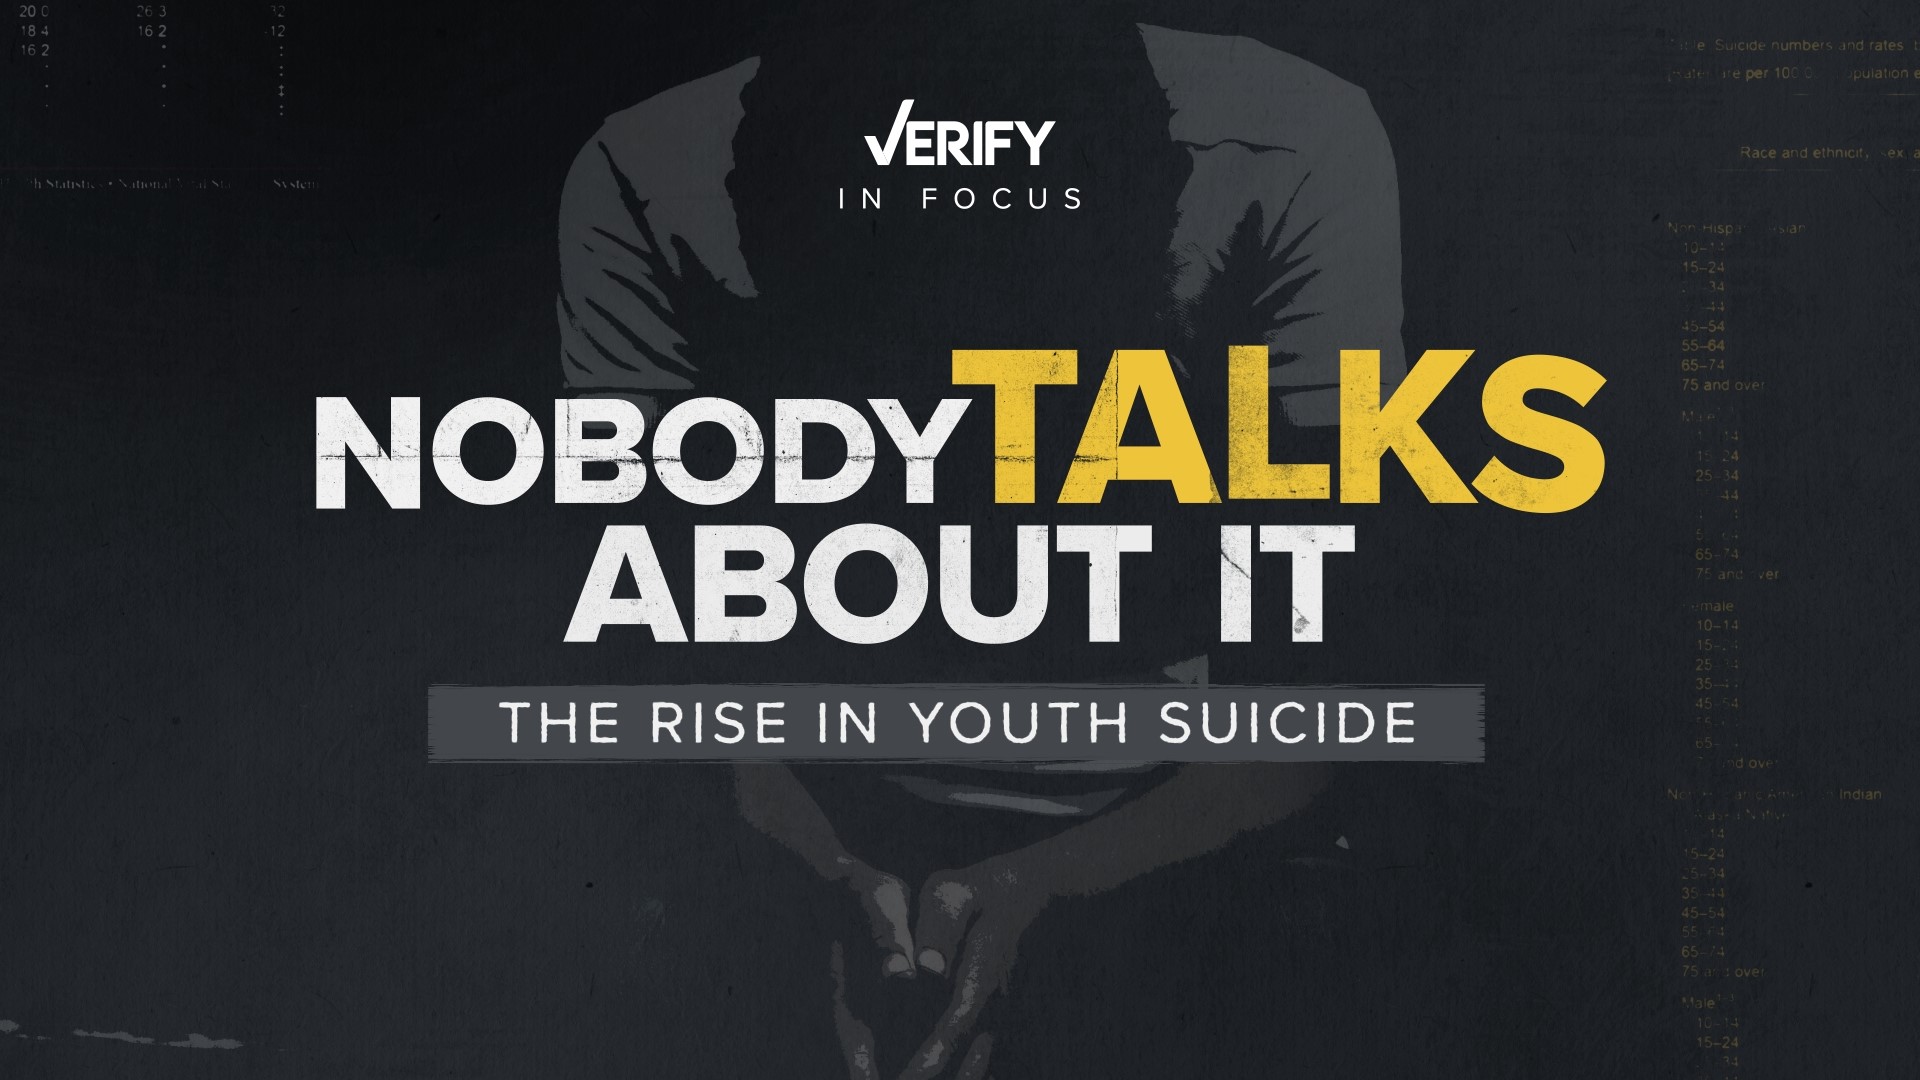 VERIFY spoke with parents and mental health experts to get a better understanding of the many factors that contributed to the rise in youth suicides in the U.S.